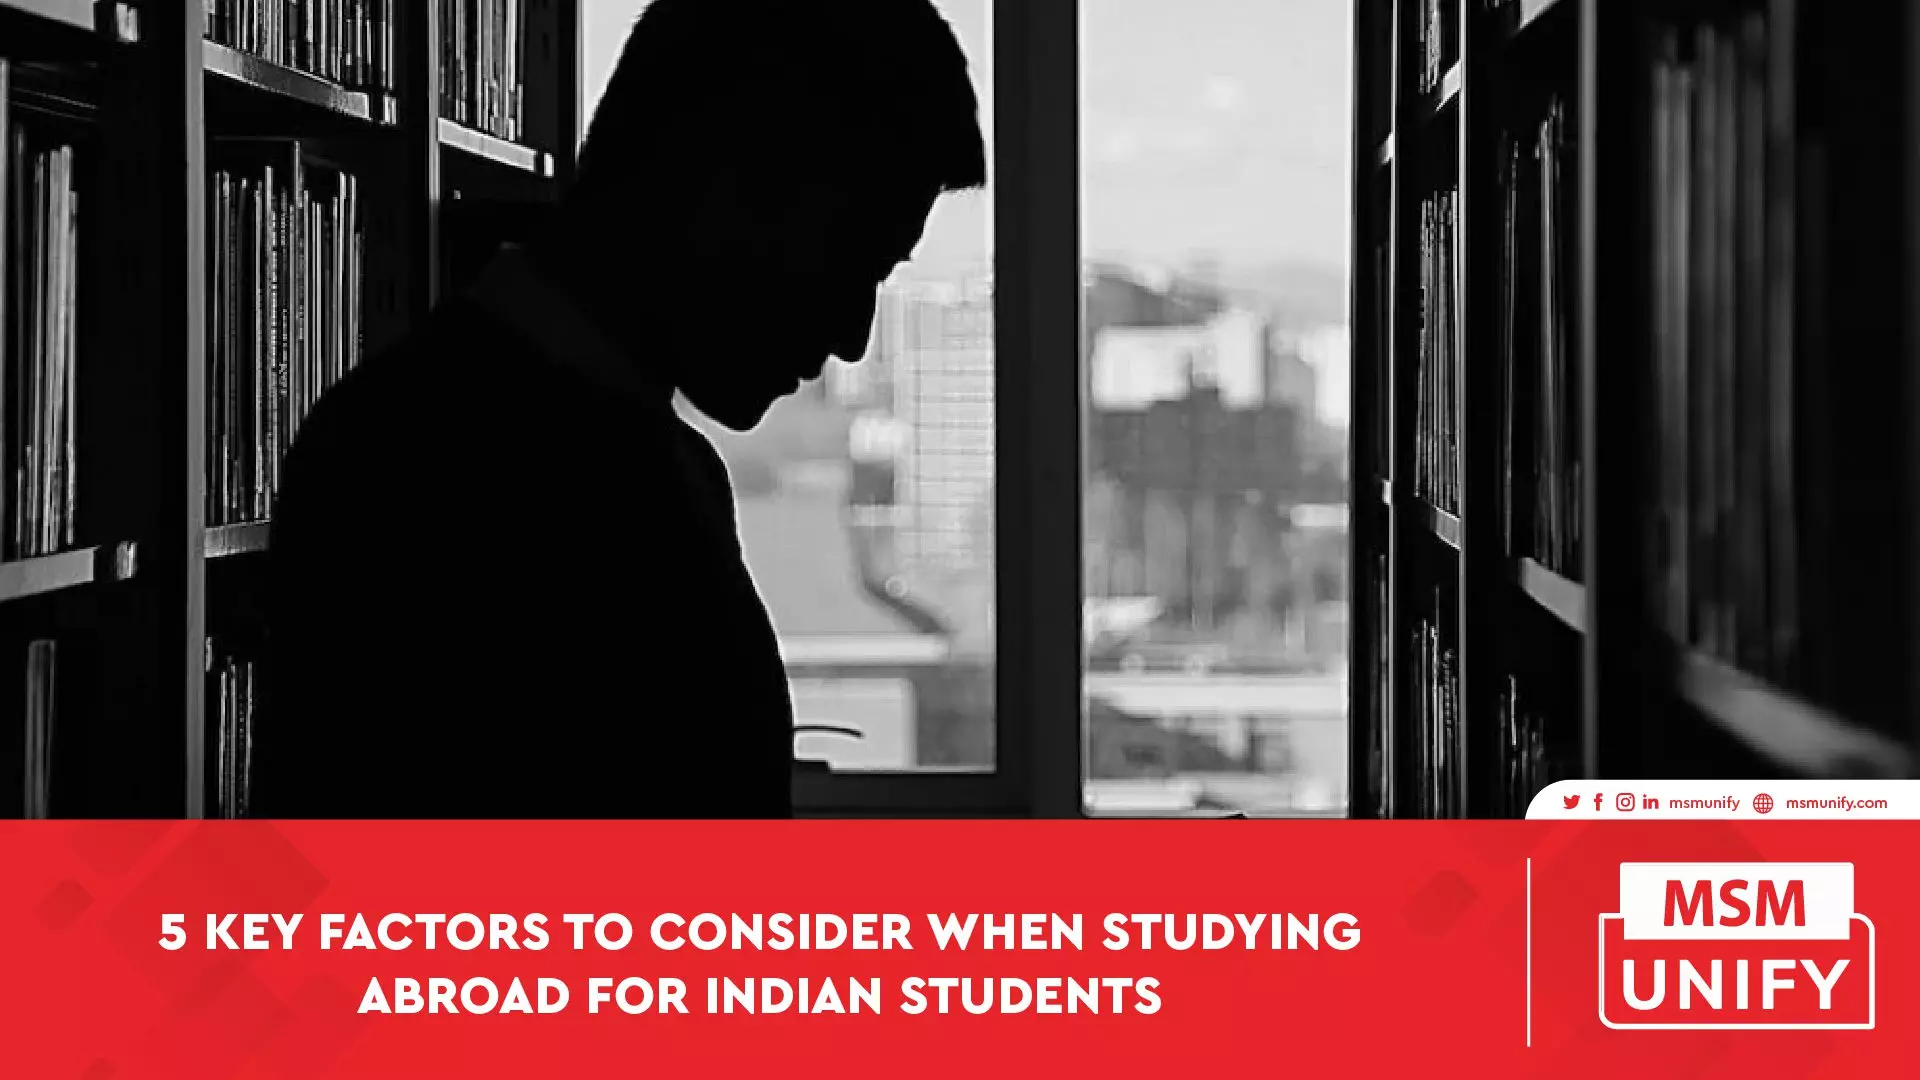 011623 MSM Unify 5 Key Factors to Consider When Studying Abroad for Indian Students 01